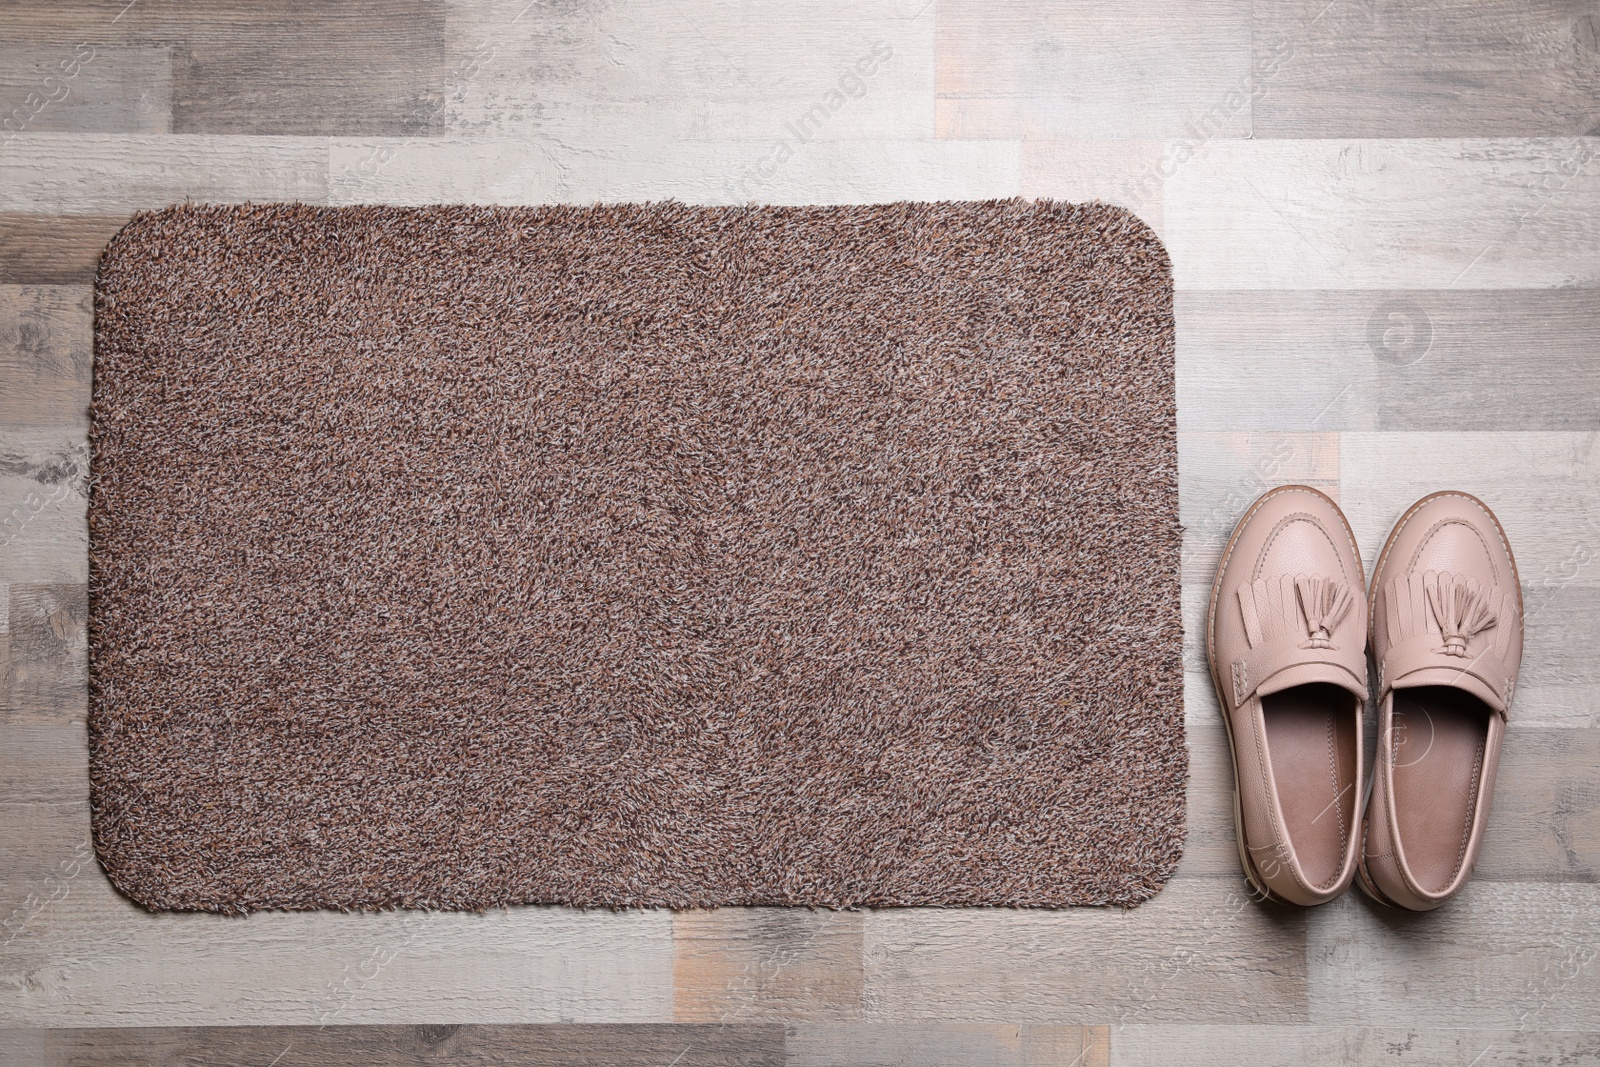 Photo of New clean door mat and shoes on floor, flat lay